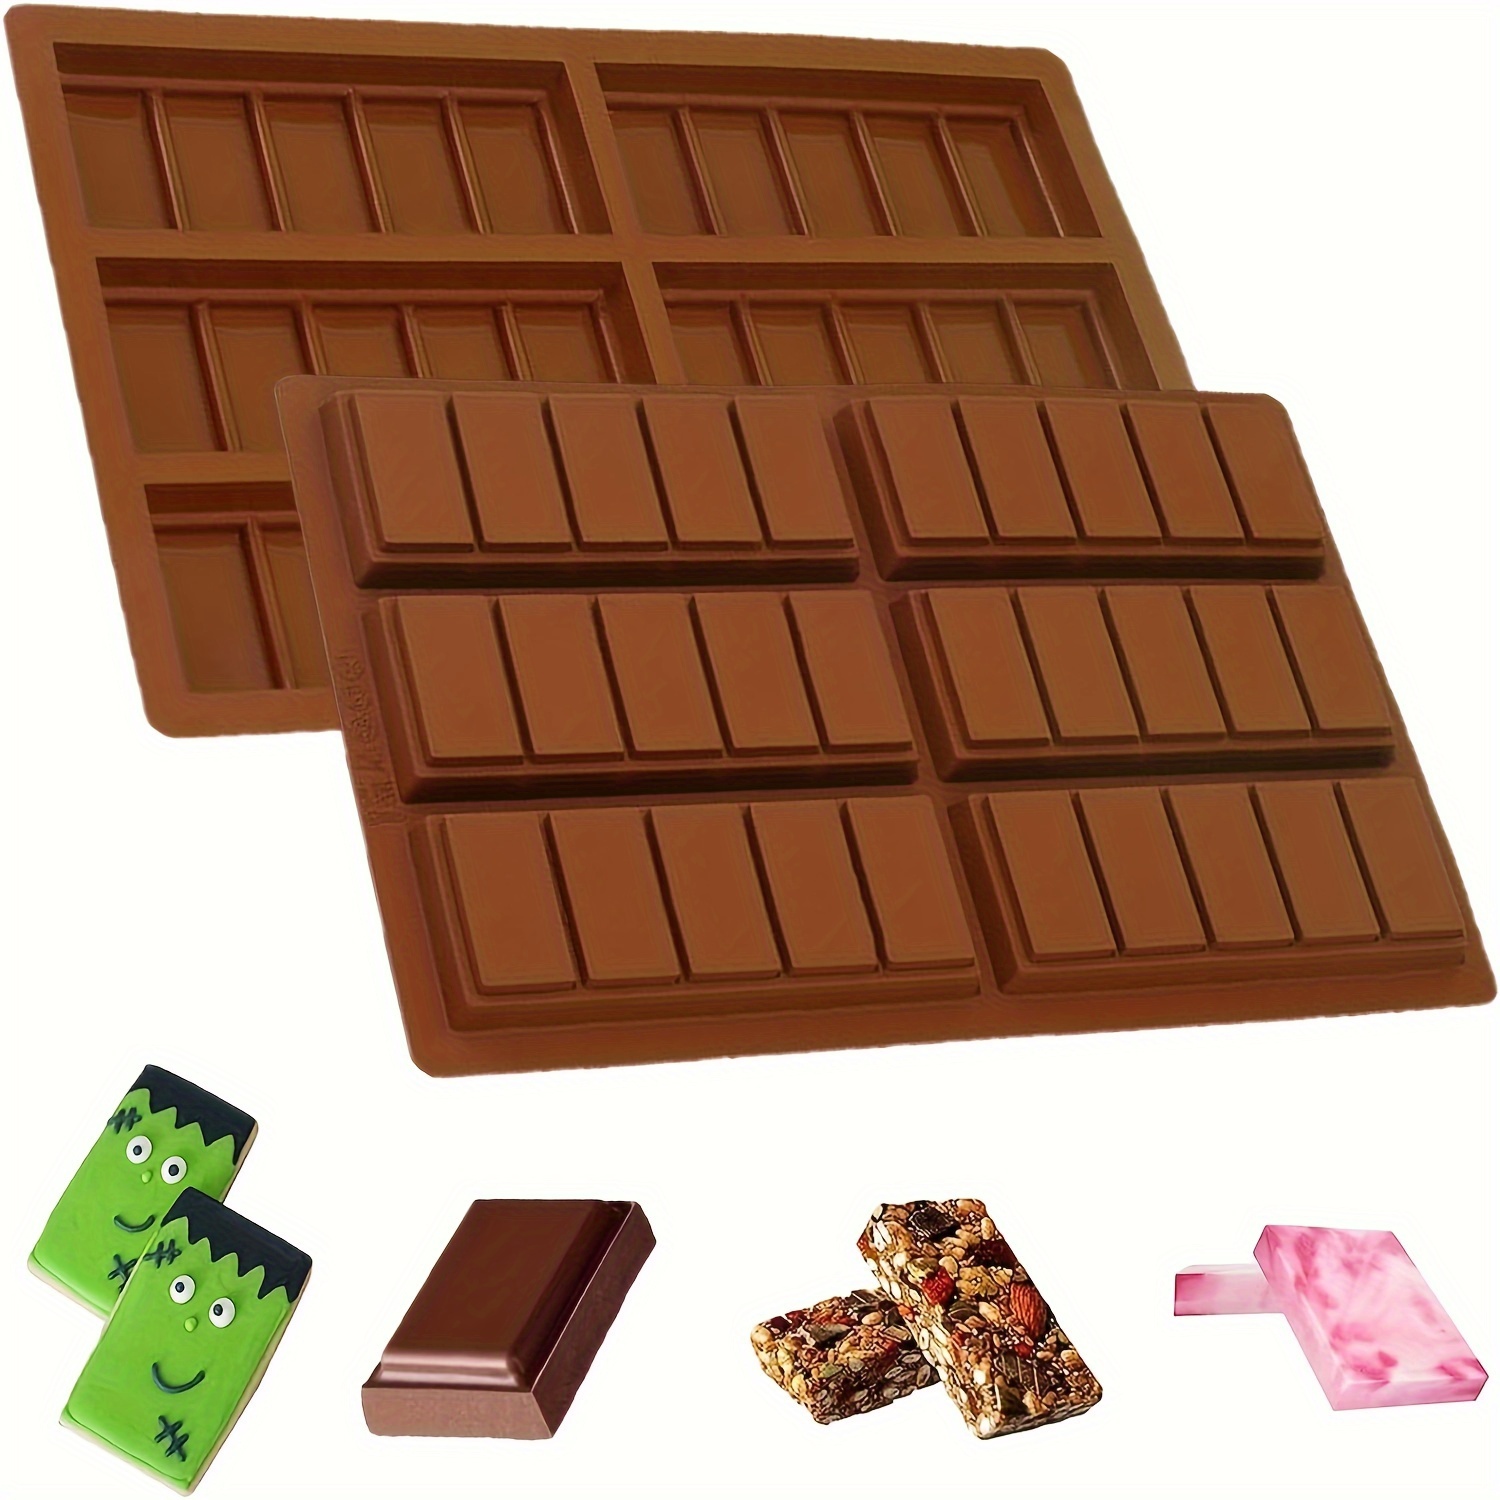 SILICONE CANDLE MOLDS 12 Cavities Soap Molds Wax Melt Molds Chocolate  $15.20 - PicClick AU